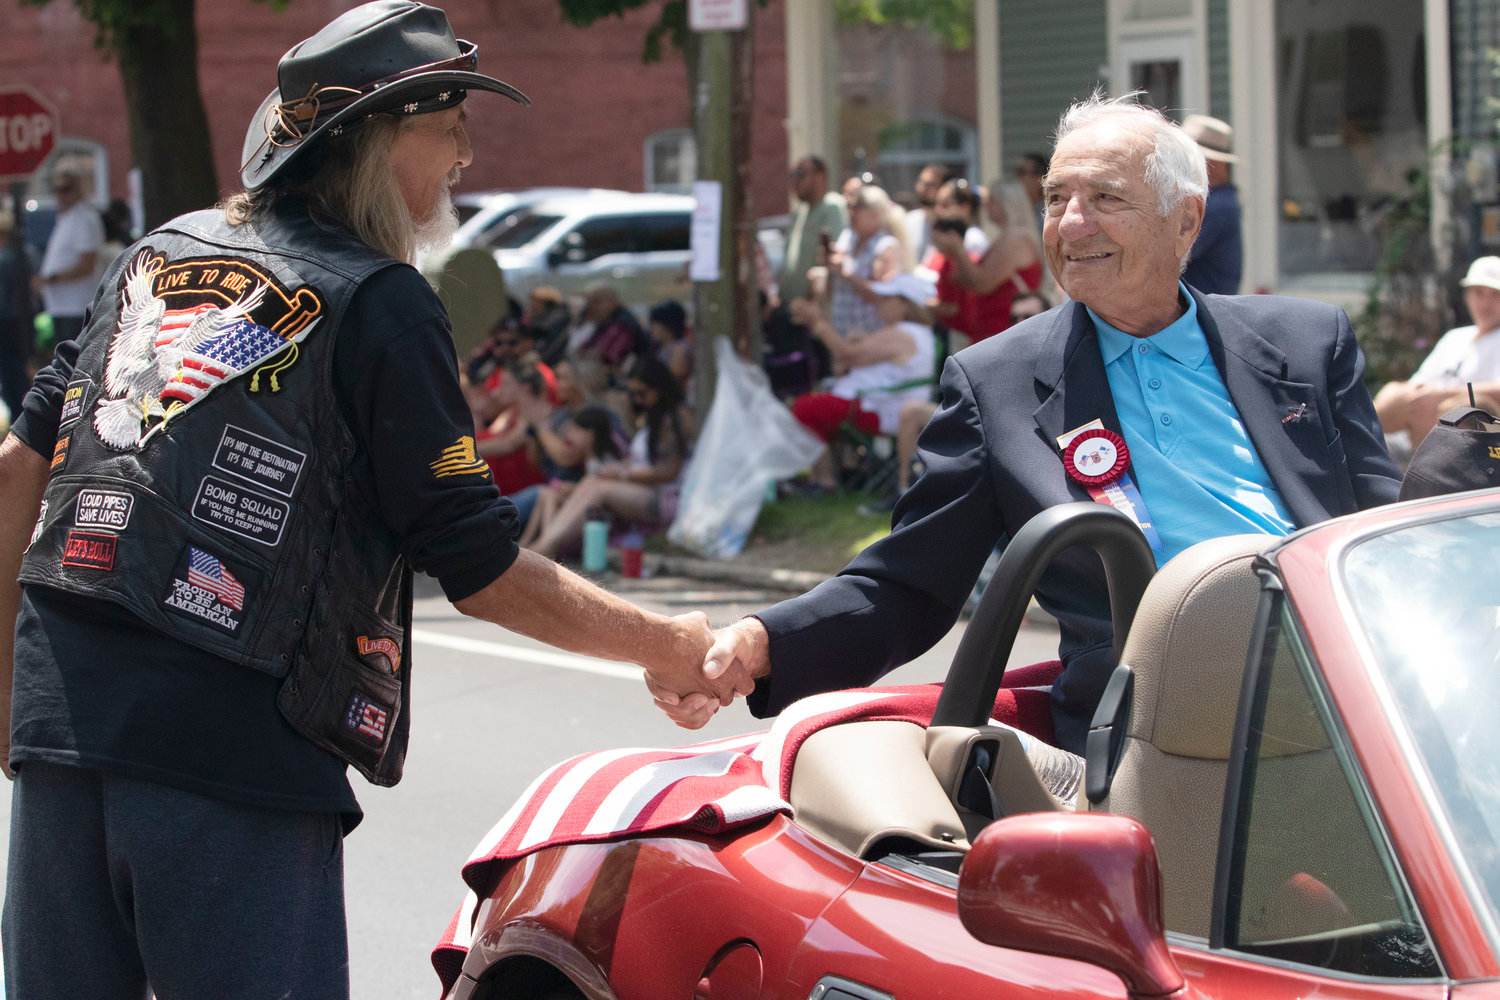 Purple Heart recipient Arthur Medeiros greets admirers during the 2021 Bristol Fourth of July Parade. Medeiros was thrice awarded the Purple Heart for injuries received in World War II, including at the Battle of the Bulge, as well as a Silver Star and a Bronze Star for his valor. The Bristol Veterans Council and VFW Post 237 are seeking Bristol’s Purple Heart recipients for recognition, following the Town Council’s proclamation declaring Bristol a Purple Heart Town.